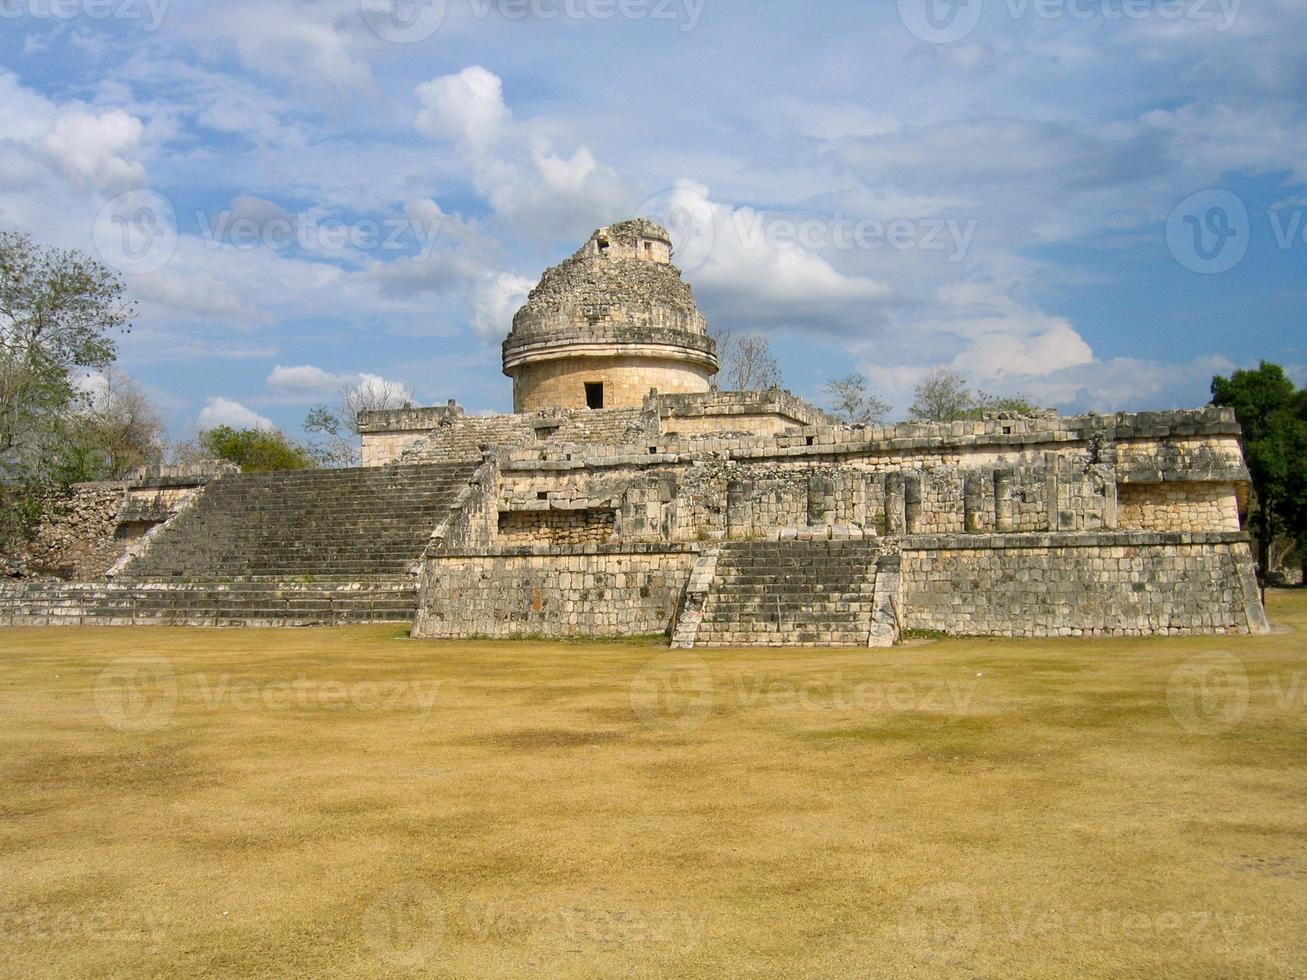 The El Caracol observatory temple in Chichen Itza. Ancient religious mayan ruins in Mexico. Remains of old indian civilization. photo